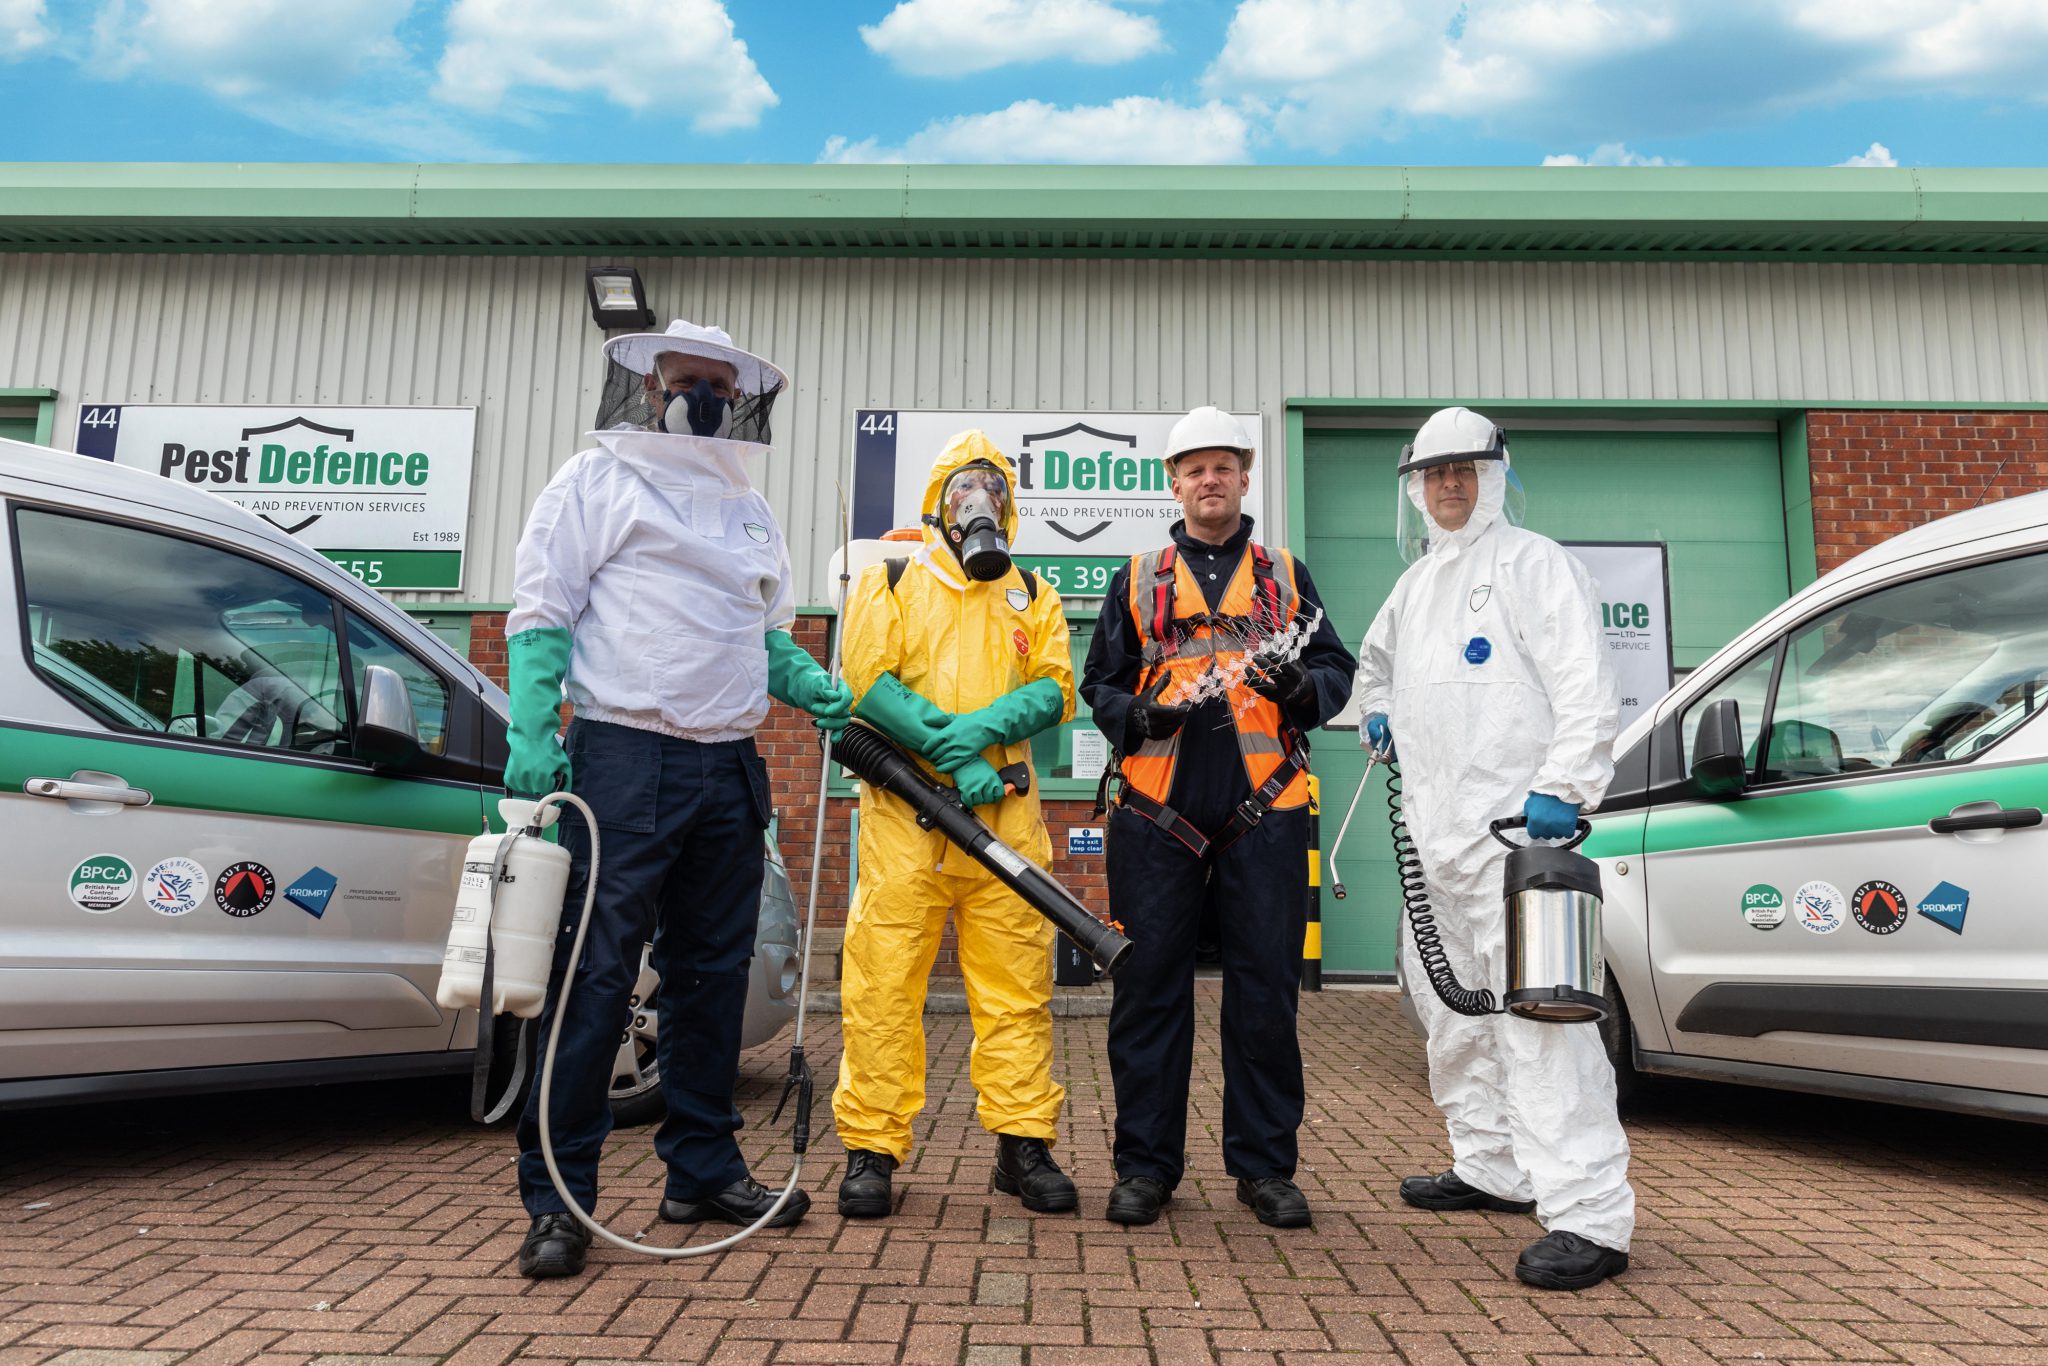 Emergency Pest Control in Chelmsford & Brentwood Pest Defence